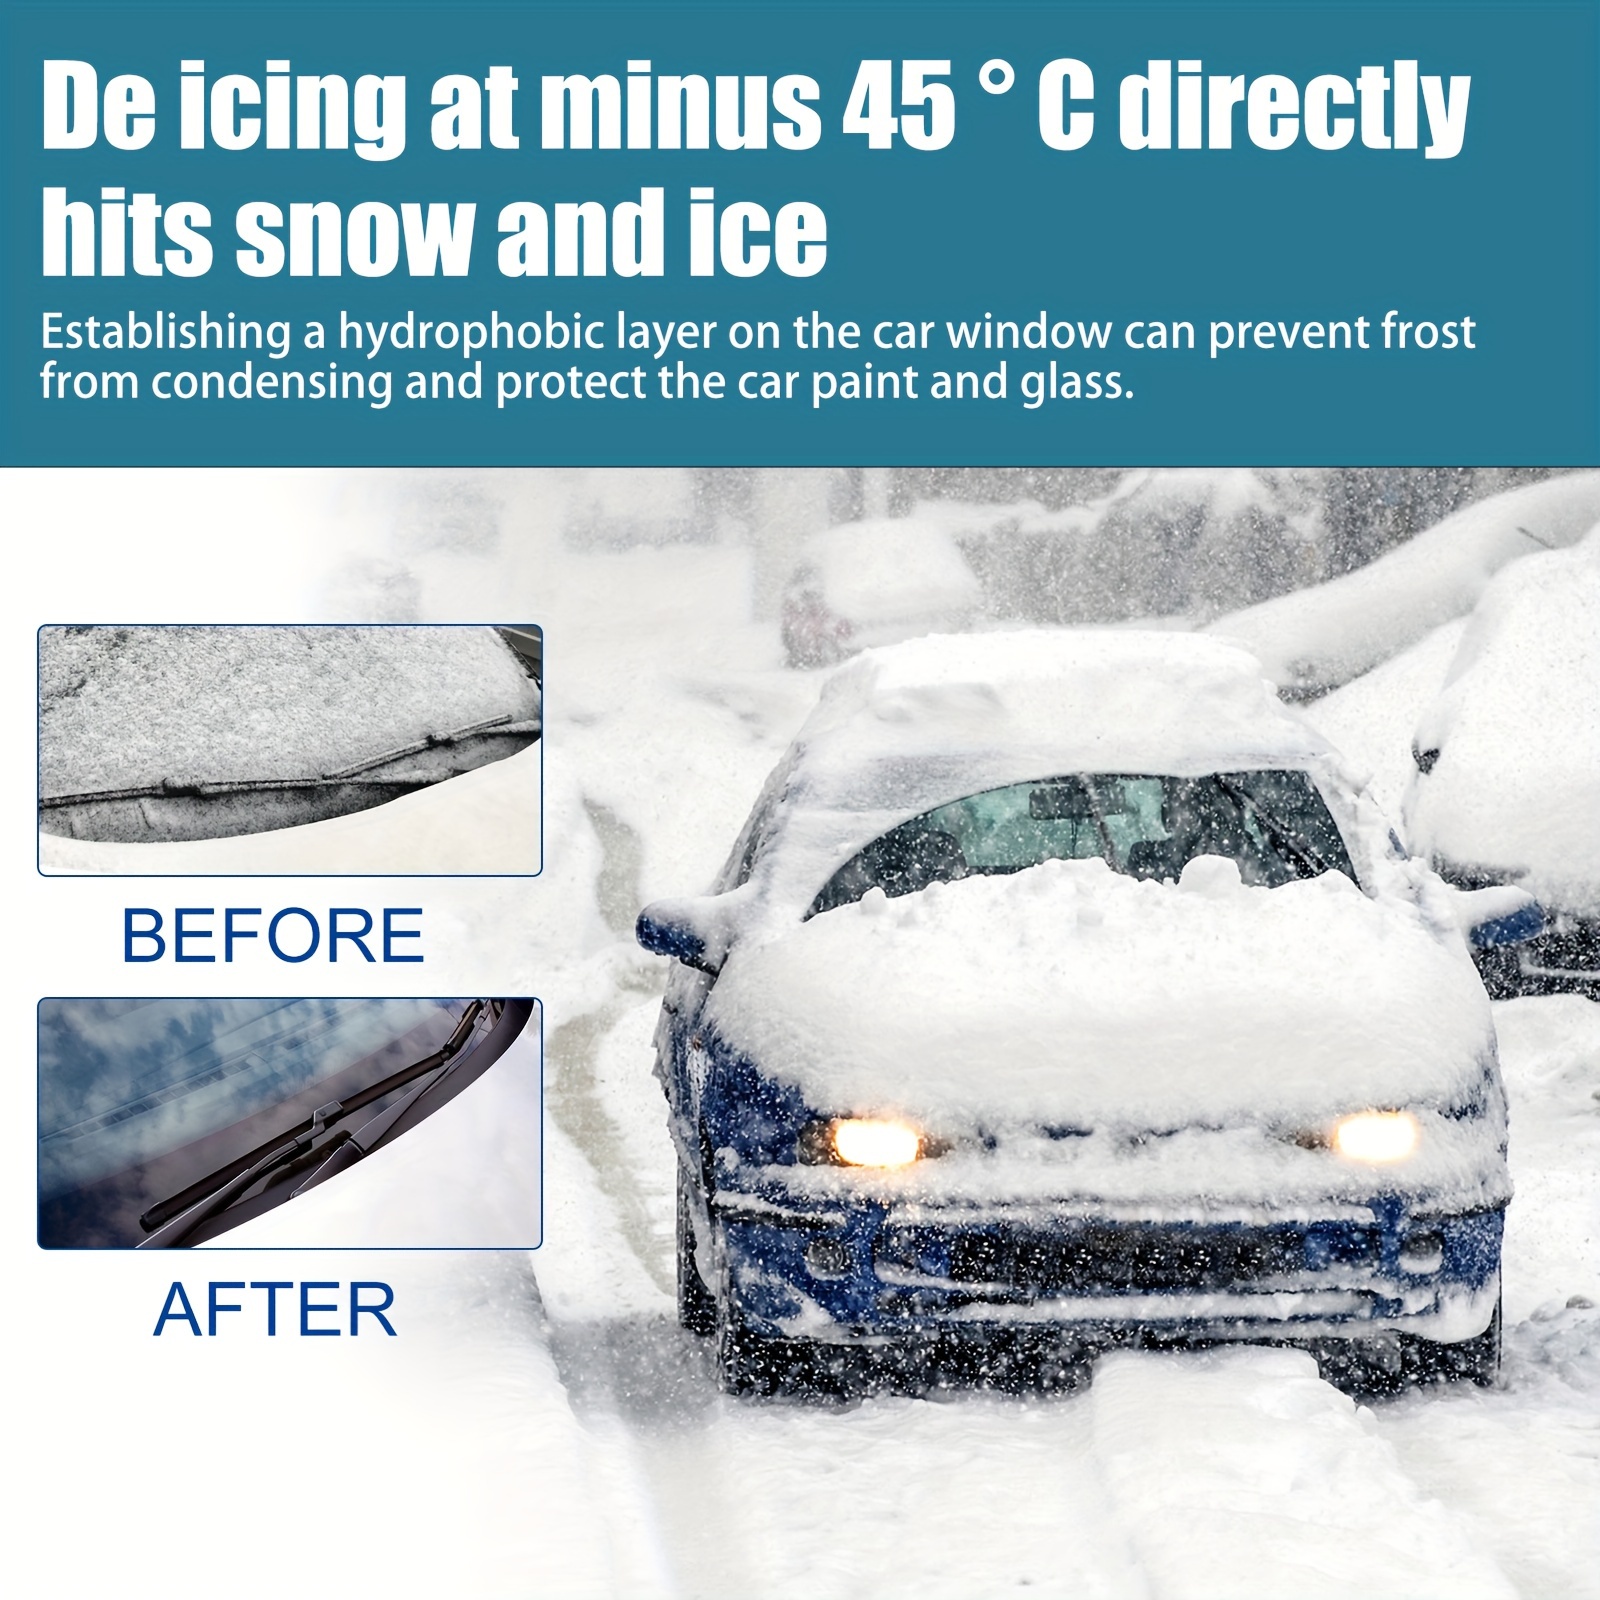 Car Windshield Deicer Defroster Ice Remover Spray Fast Snow